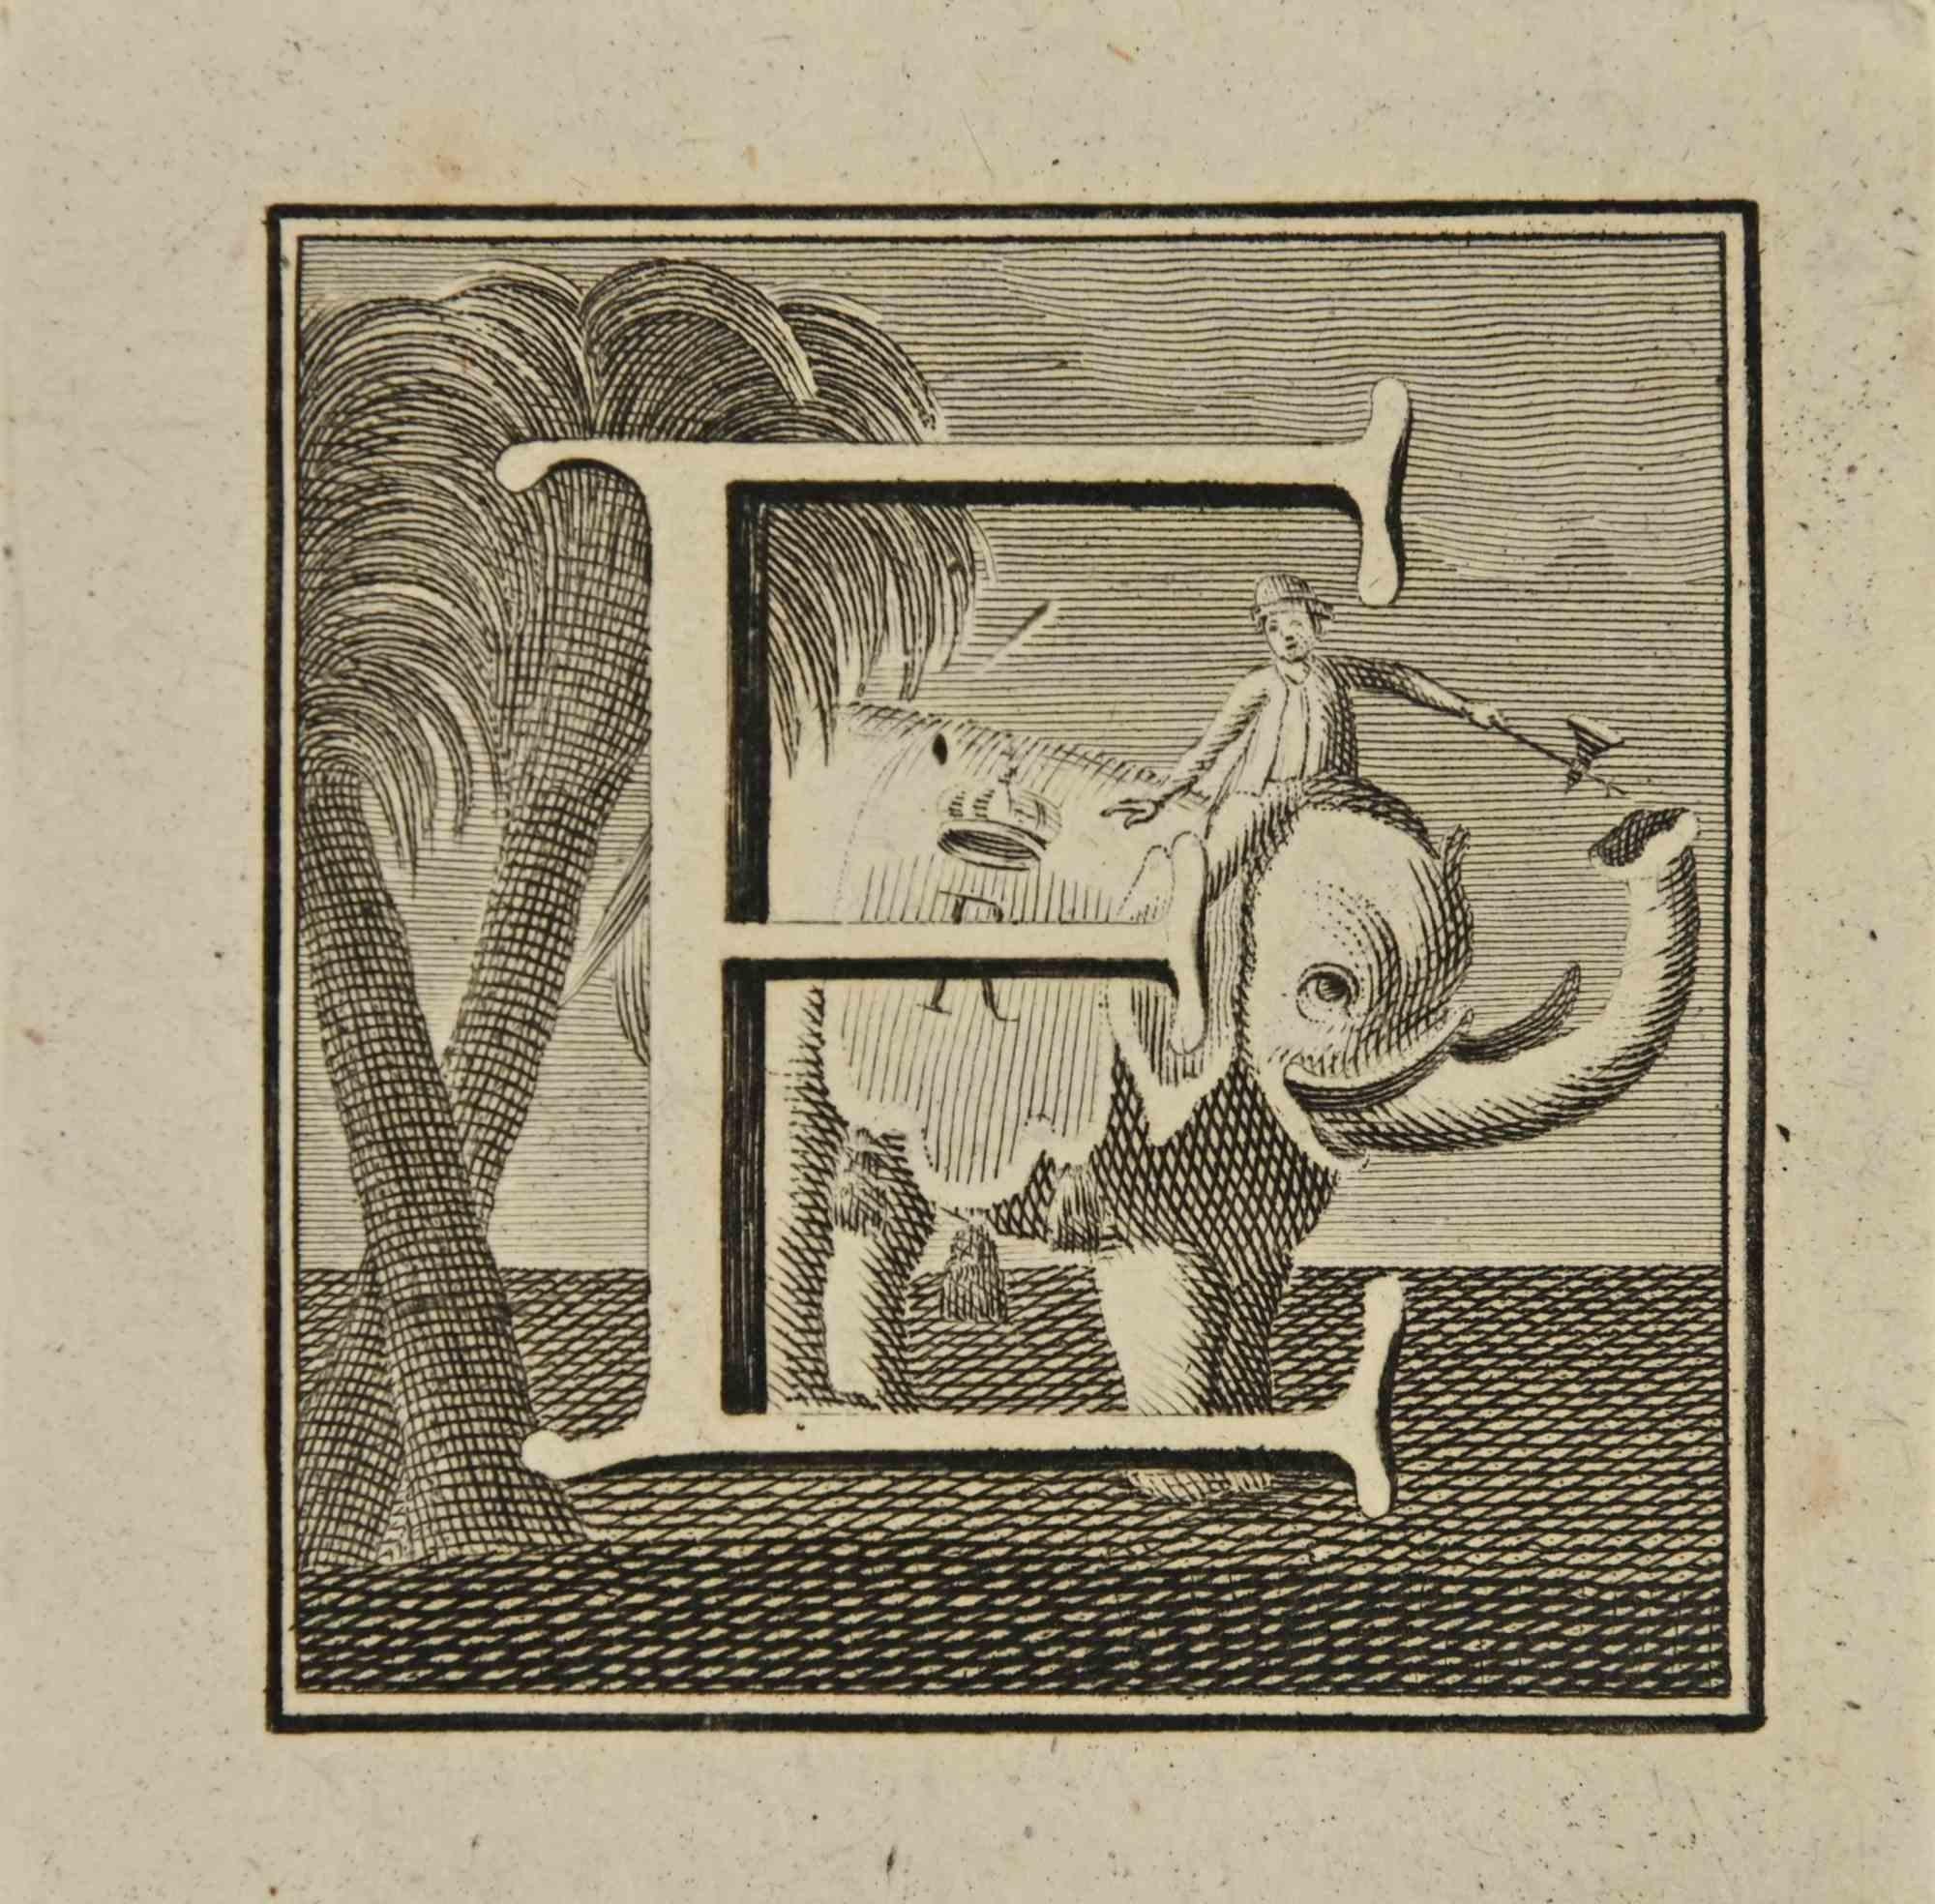 Letter of the Alphabet E,  from the series "Antiquities of Herculaneum", is an etching on paper realized by Luigi Vanvitelli in the 18th century.

Good conditions.

The etching belongs to the print suite “Antiquities of Herculaneum Exposed”